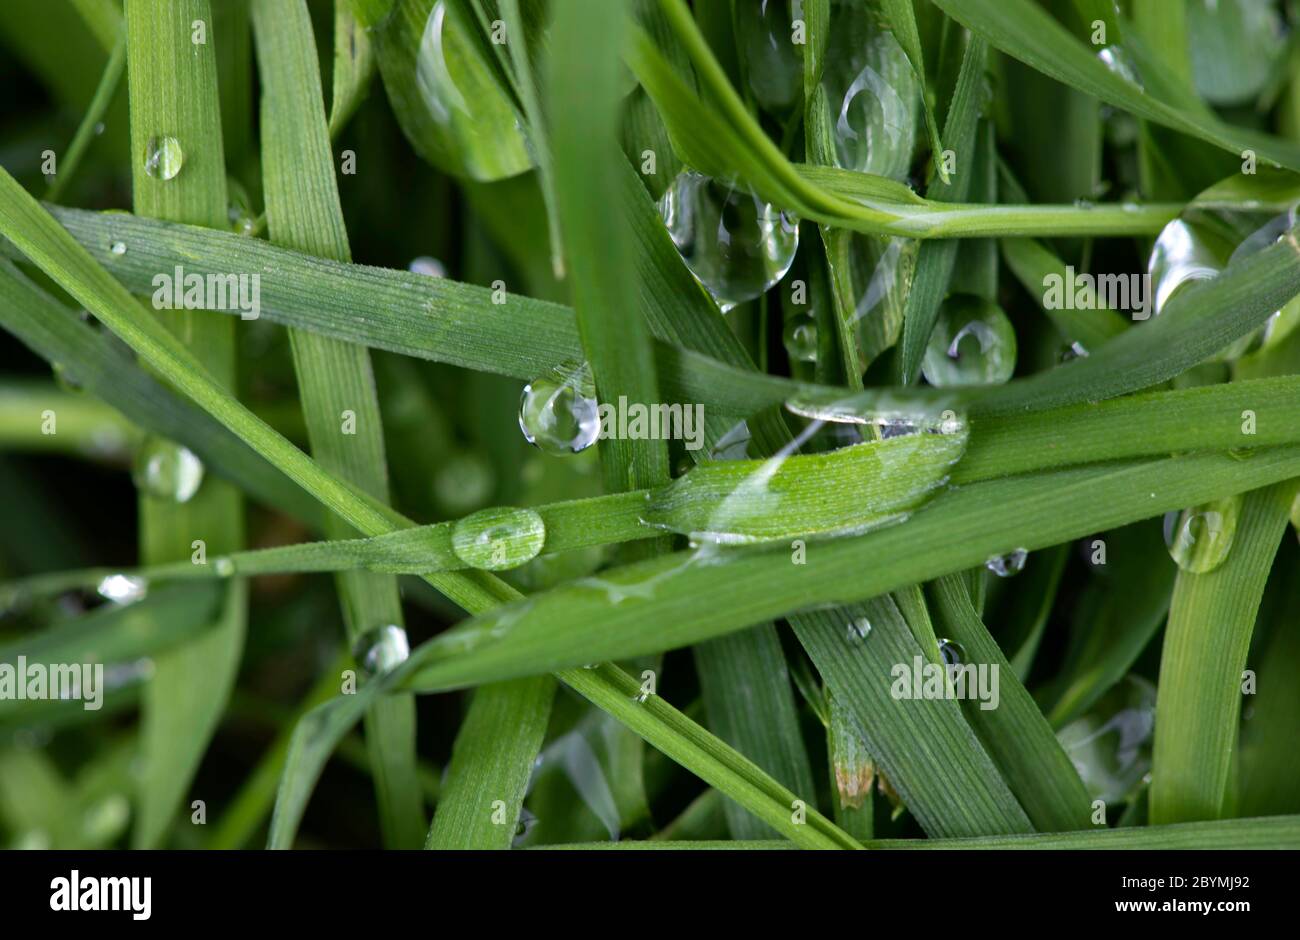 Water droplets rest on strands of grass in a garden after a rain shower in the morning. Stock Photo